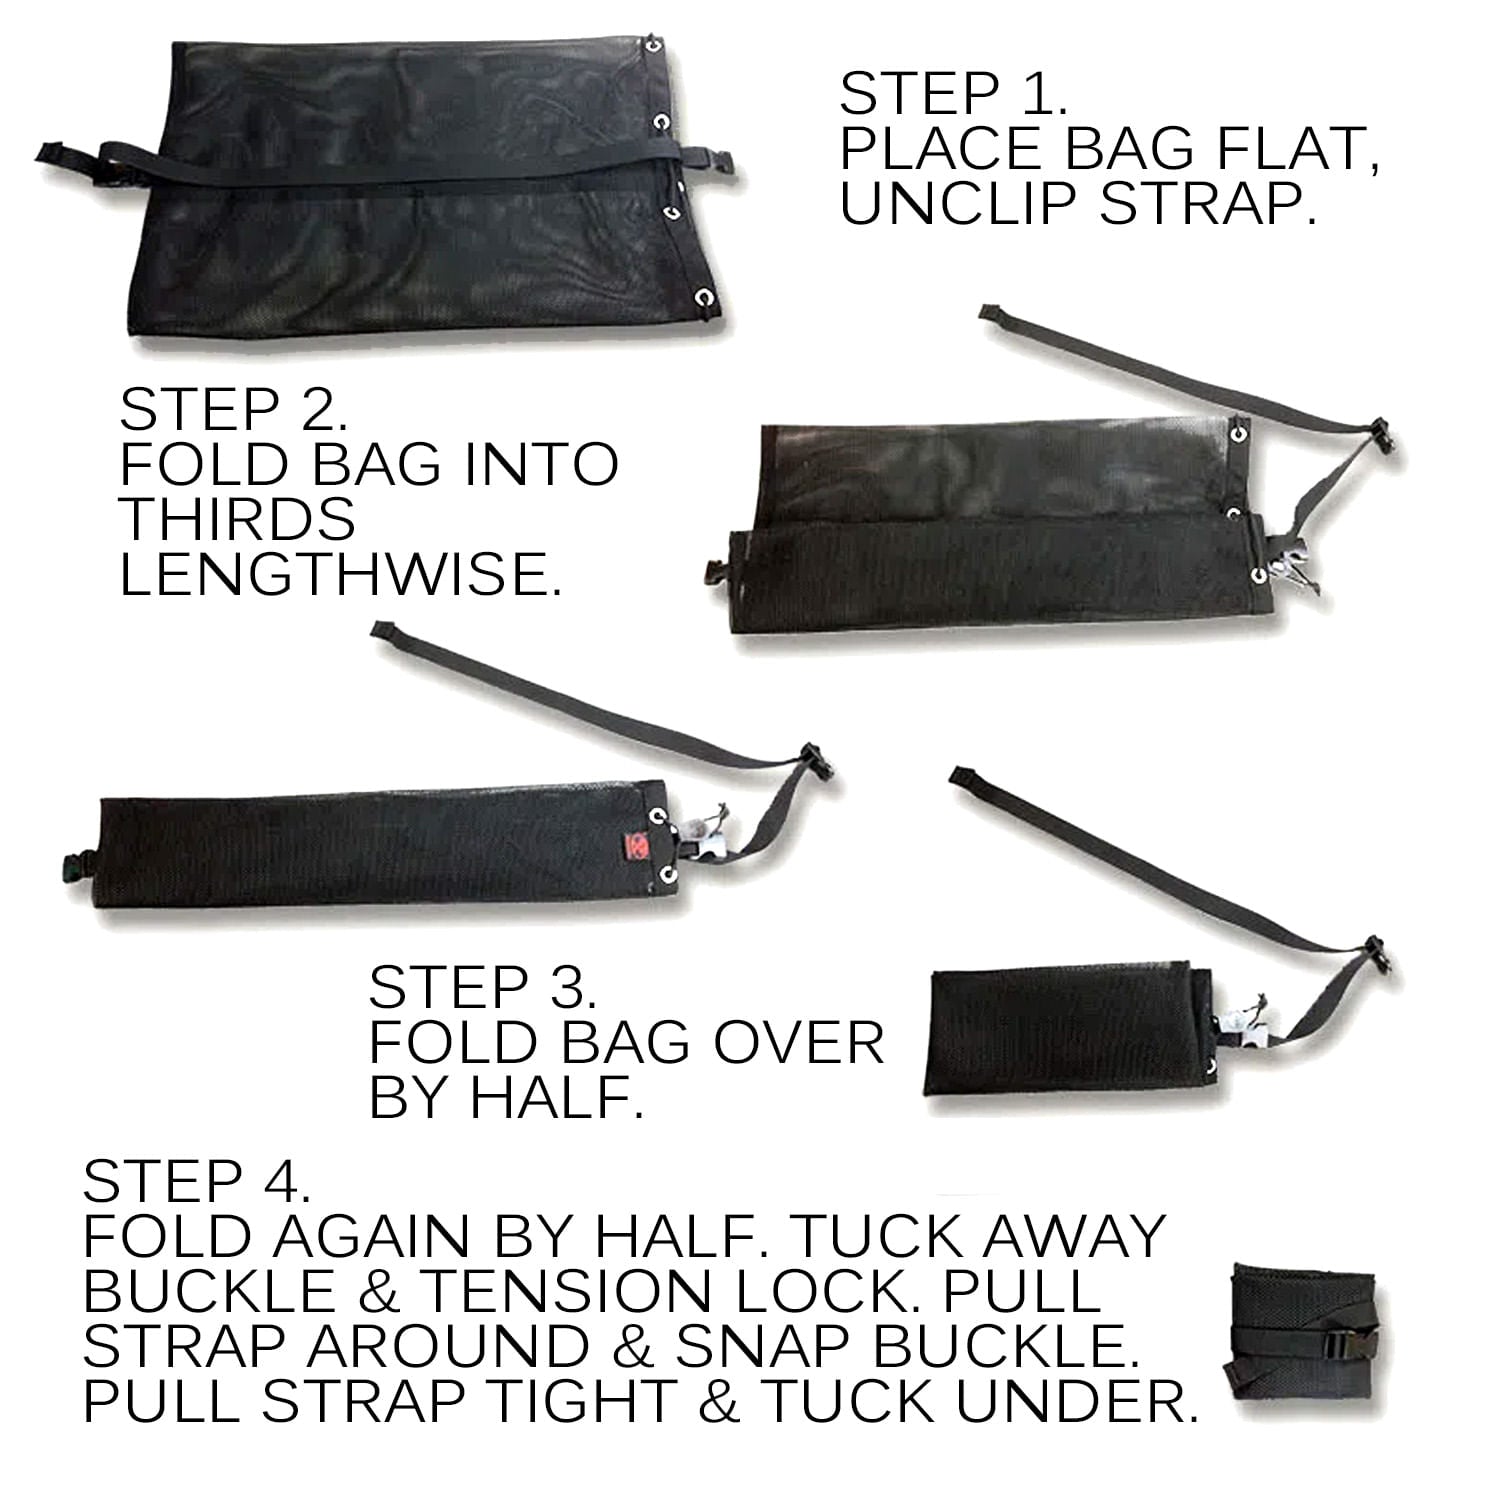 Folding instructions for the Red Oxx Laundro Bag